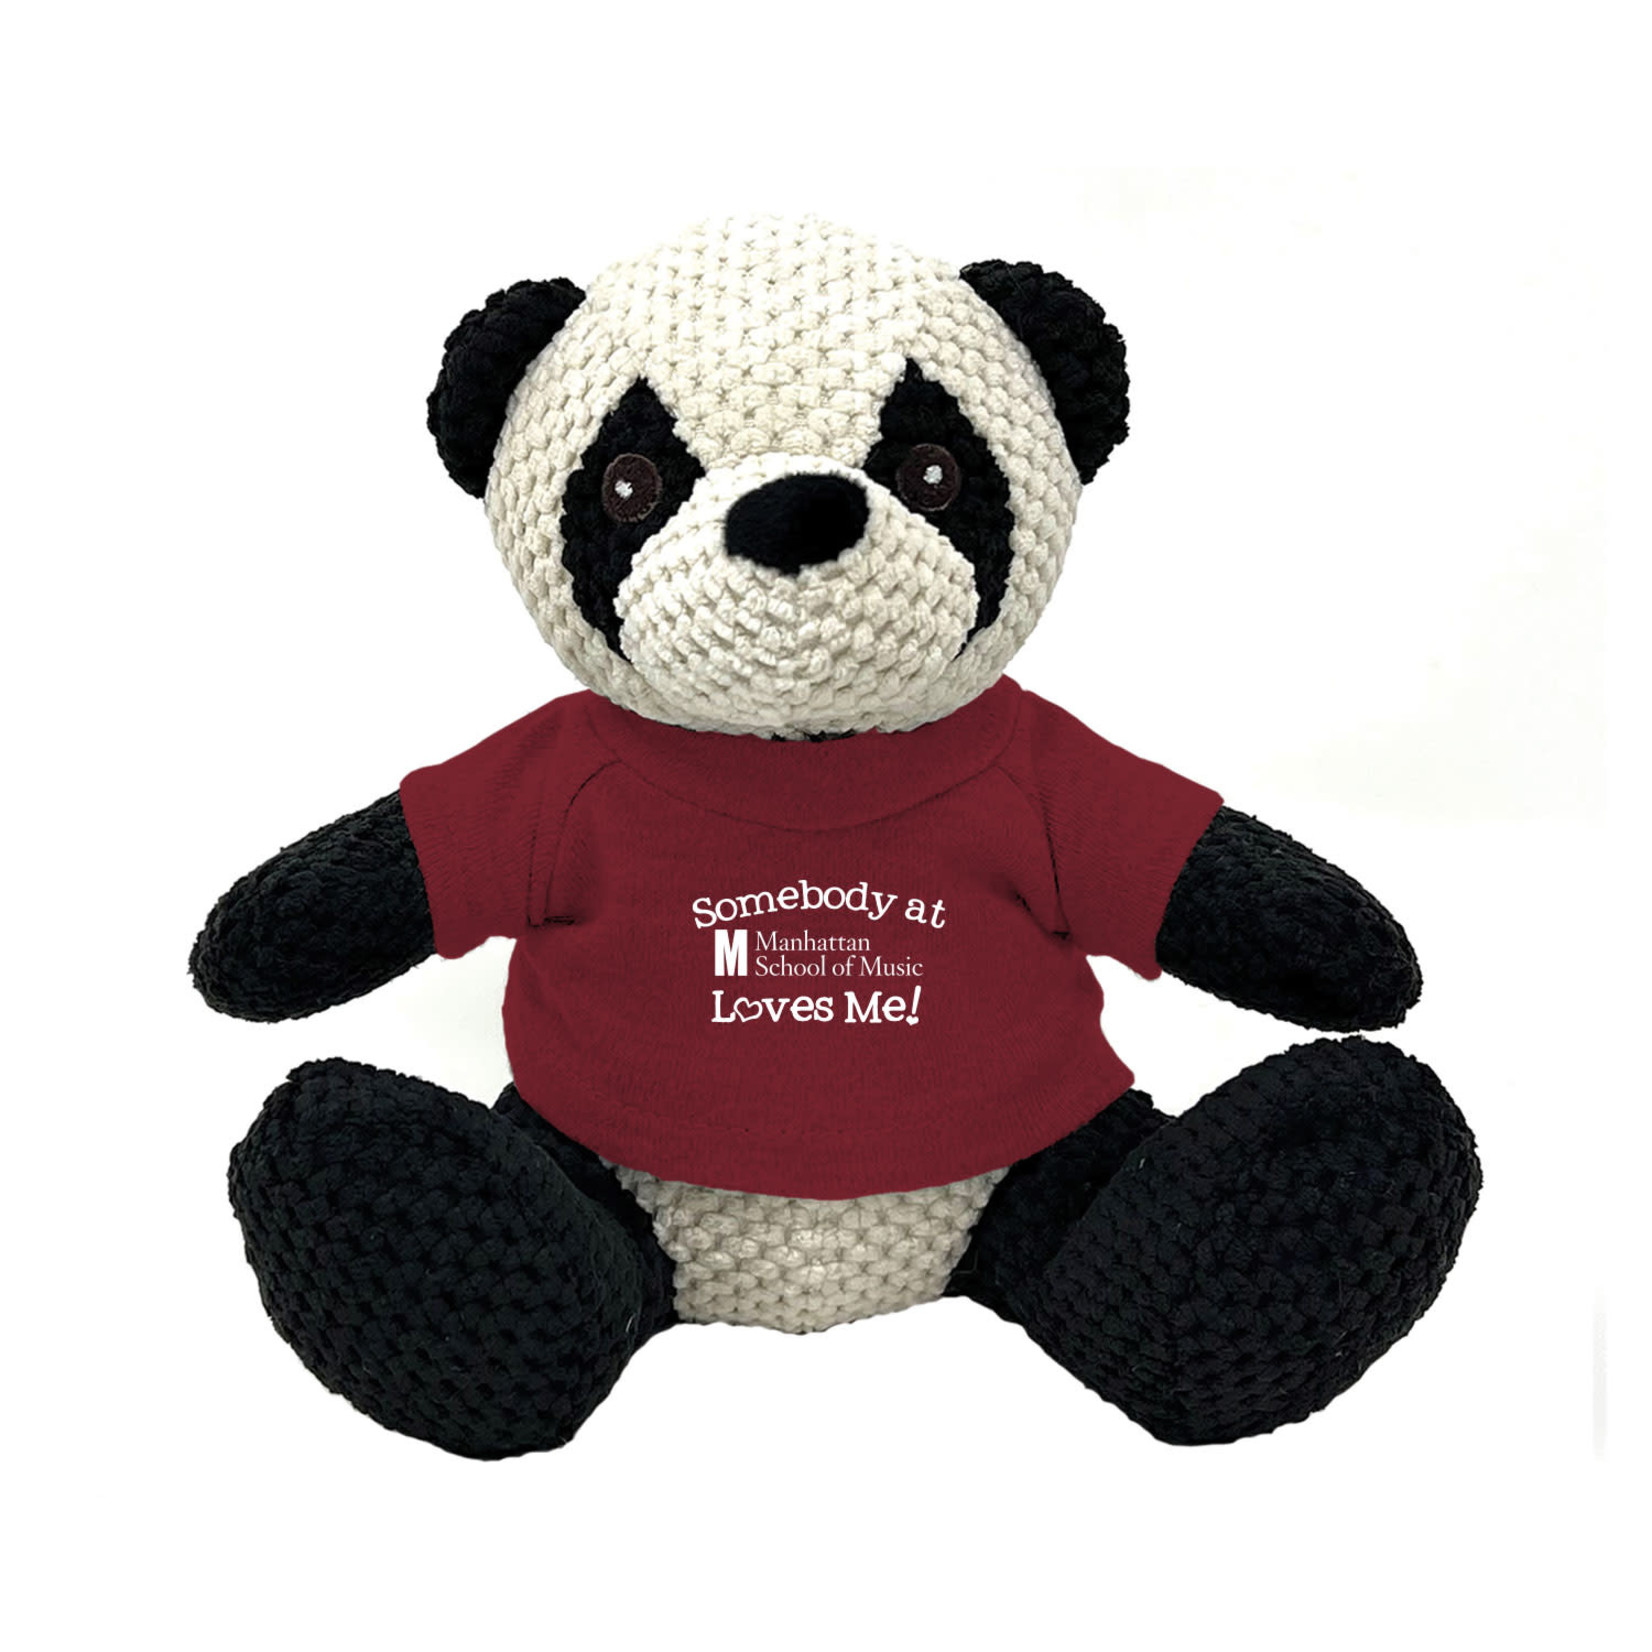 Various Woven Stuffed Animals with MSM T-shirt